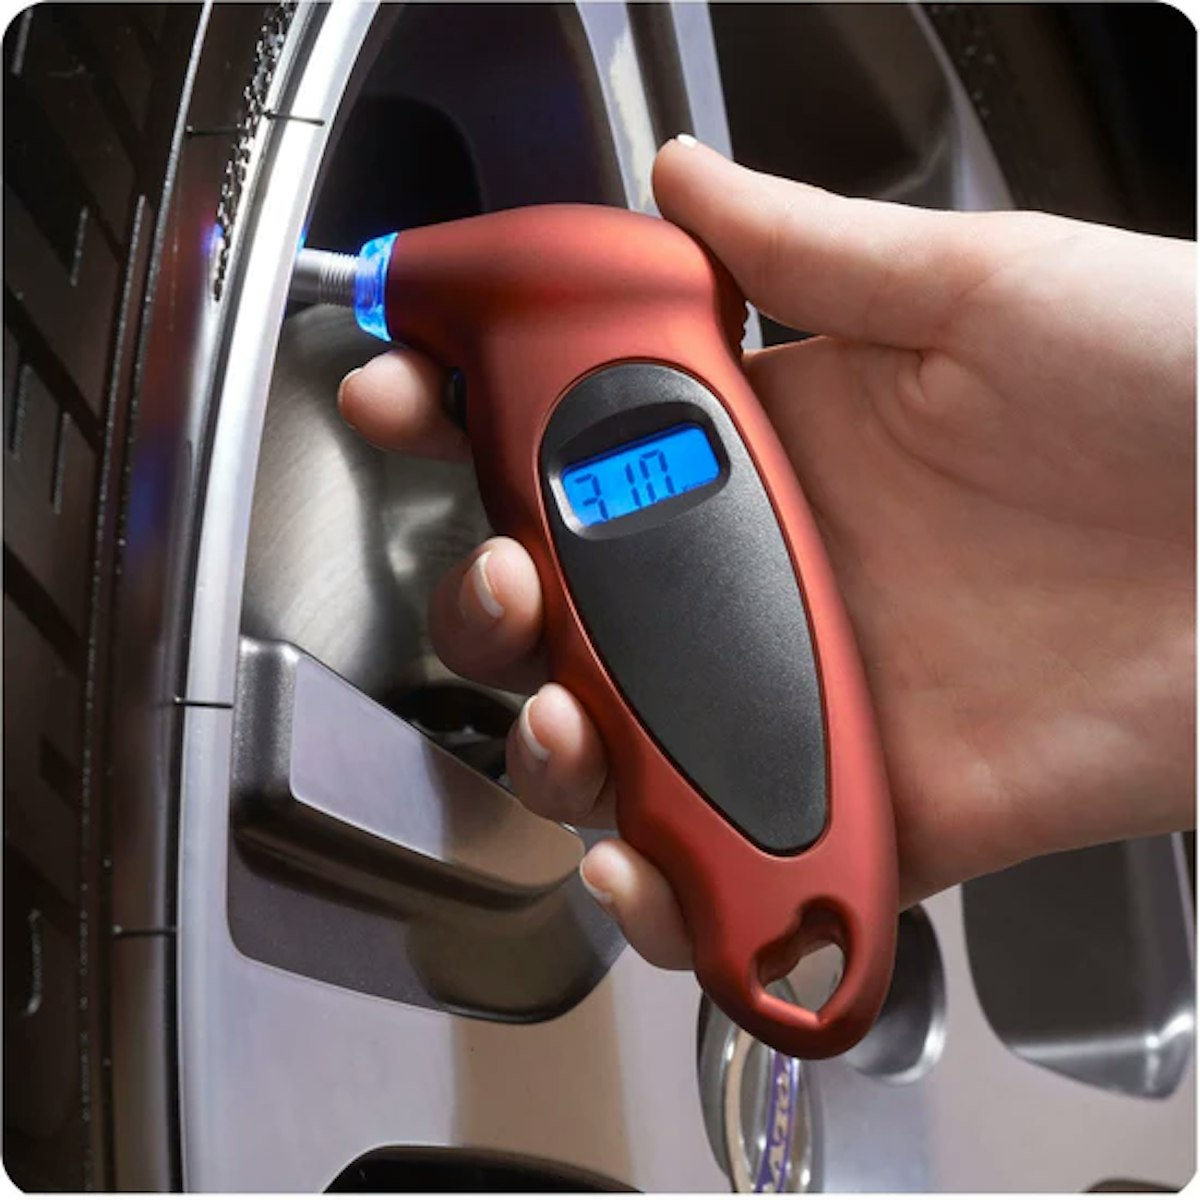 A person using a tire pressure gauge on a tire.